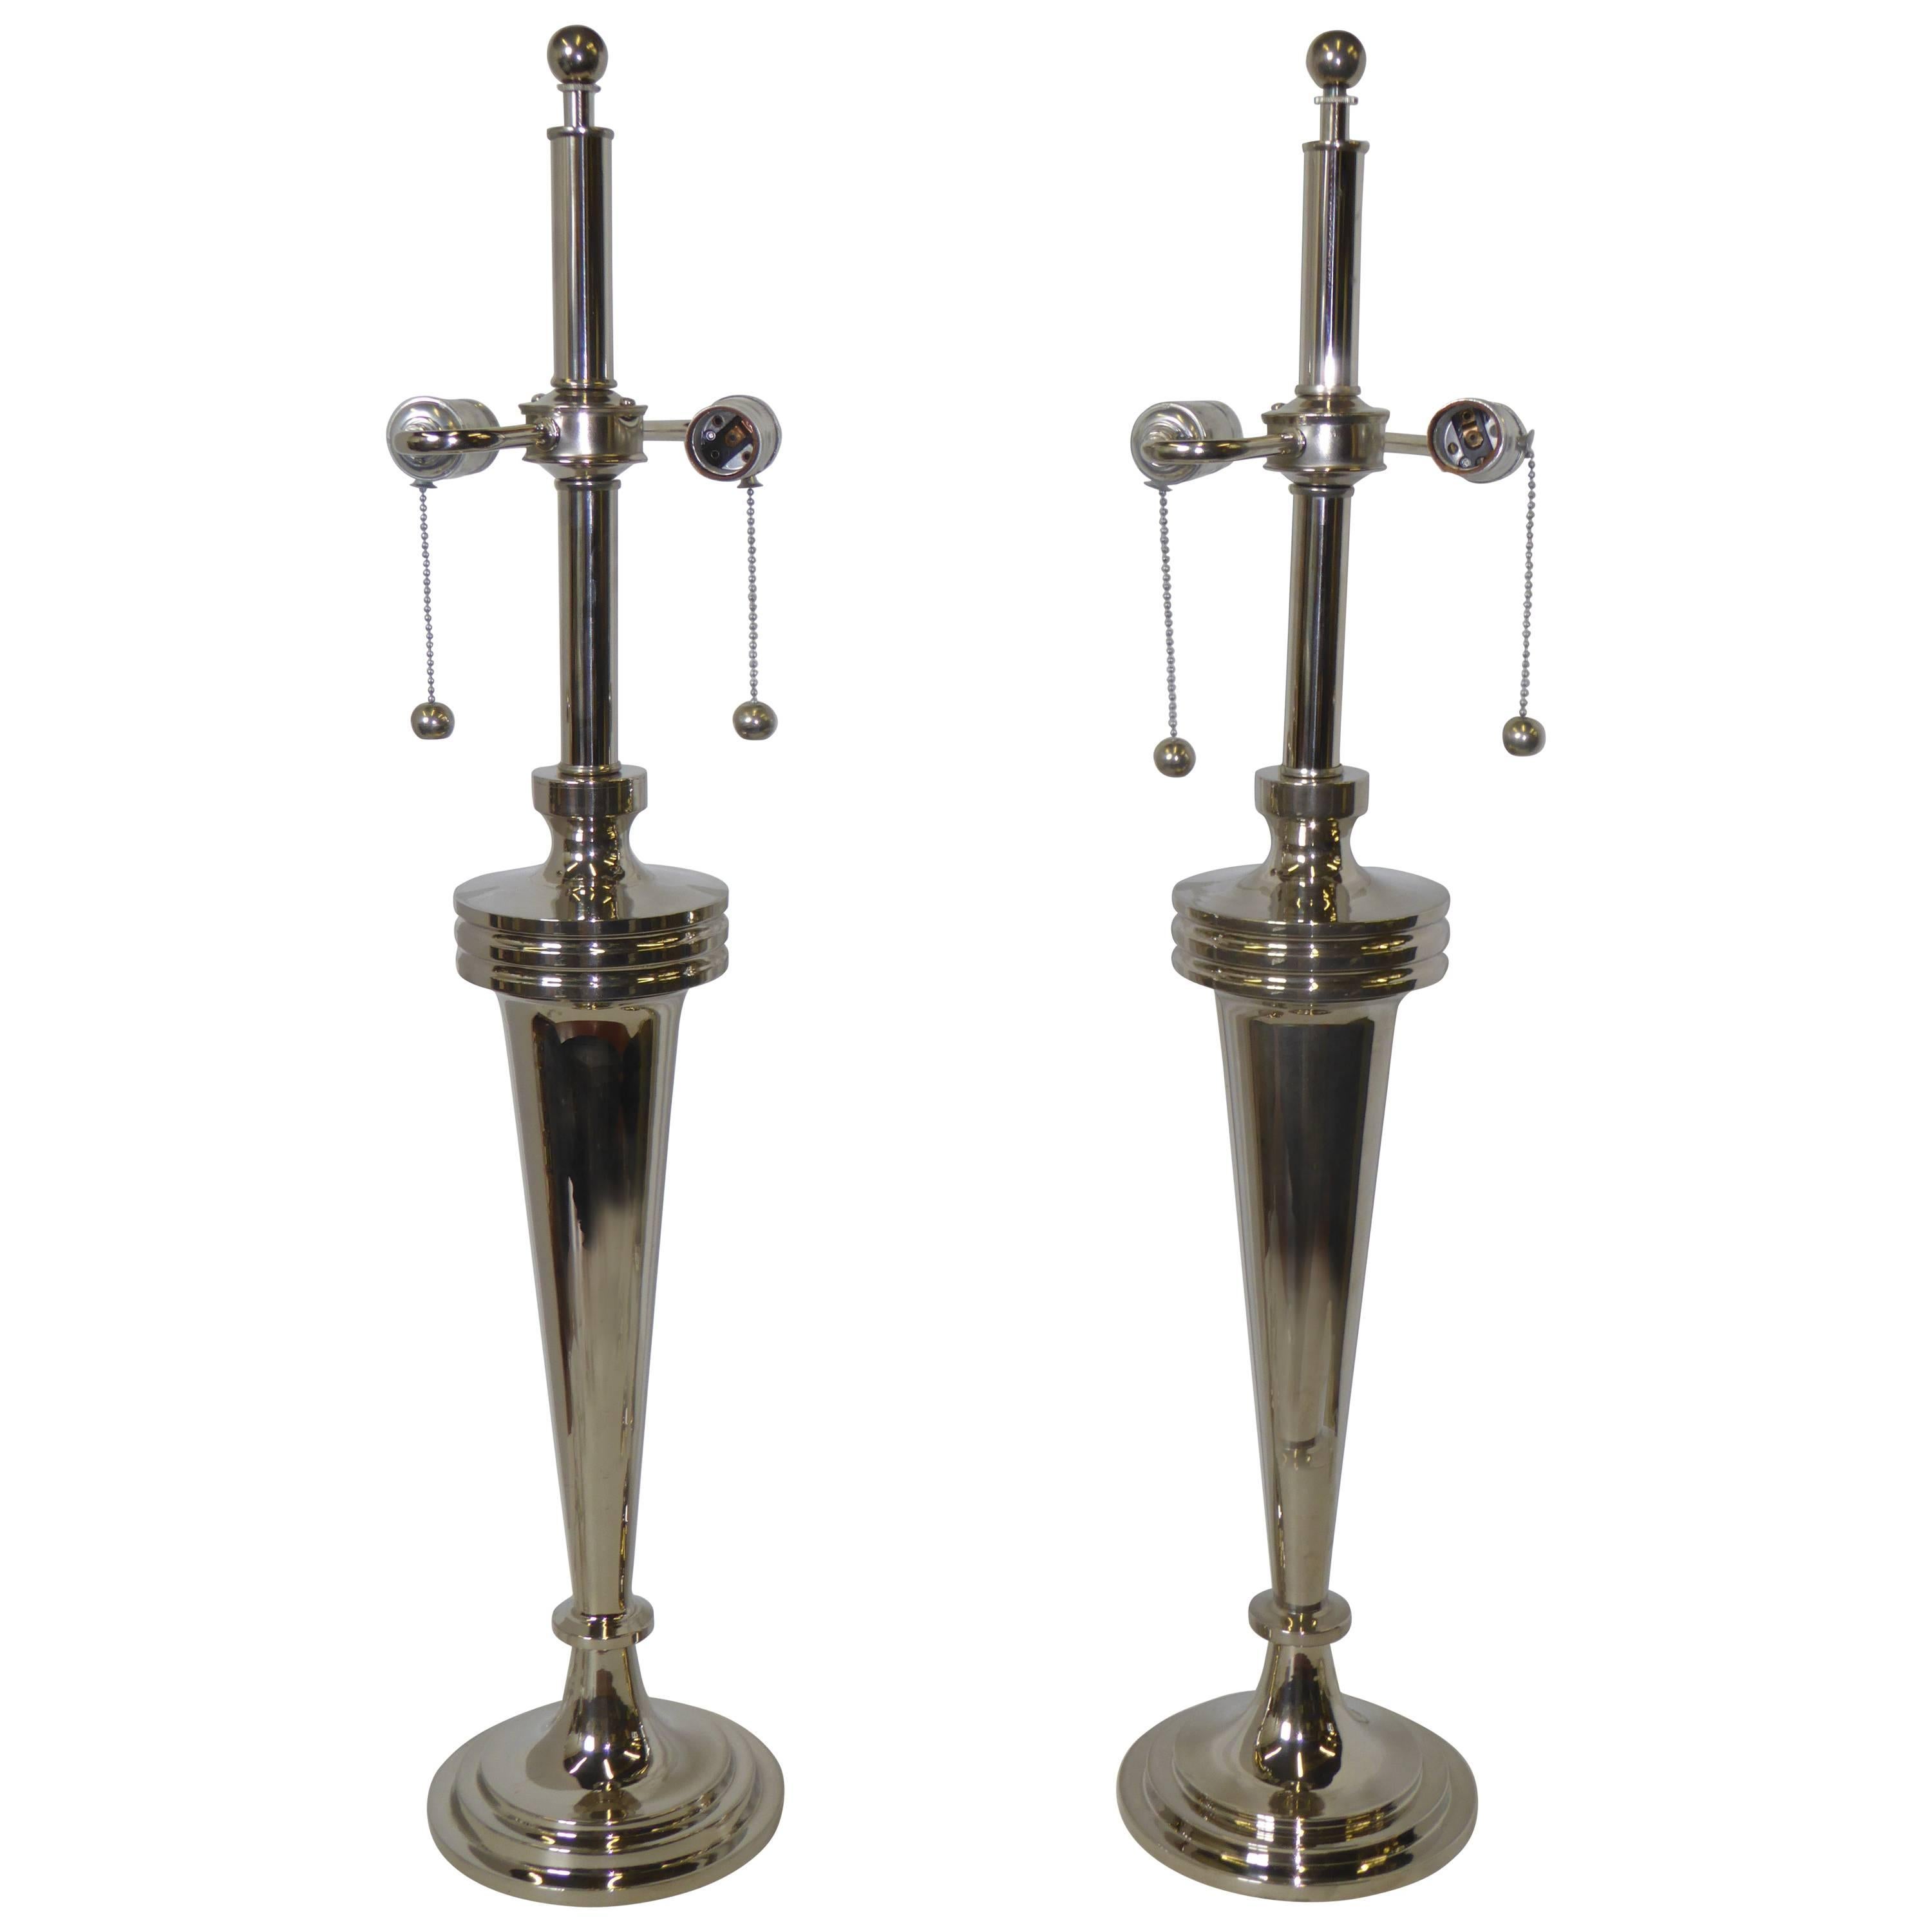 Pair of Art Deco Nickel Chrome Mutual Sunset Table Lamps